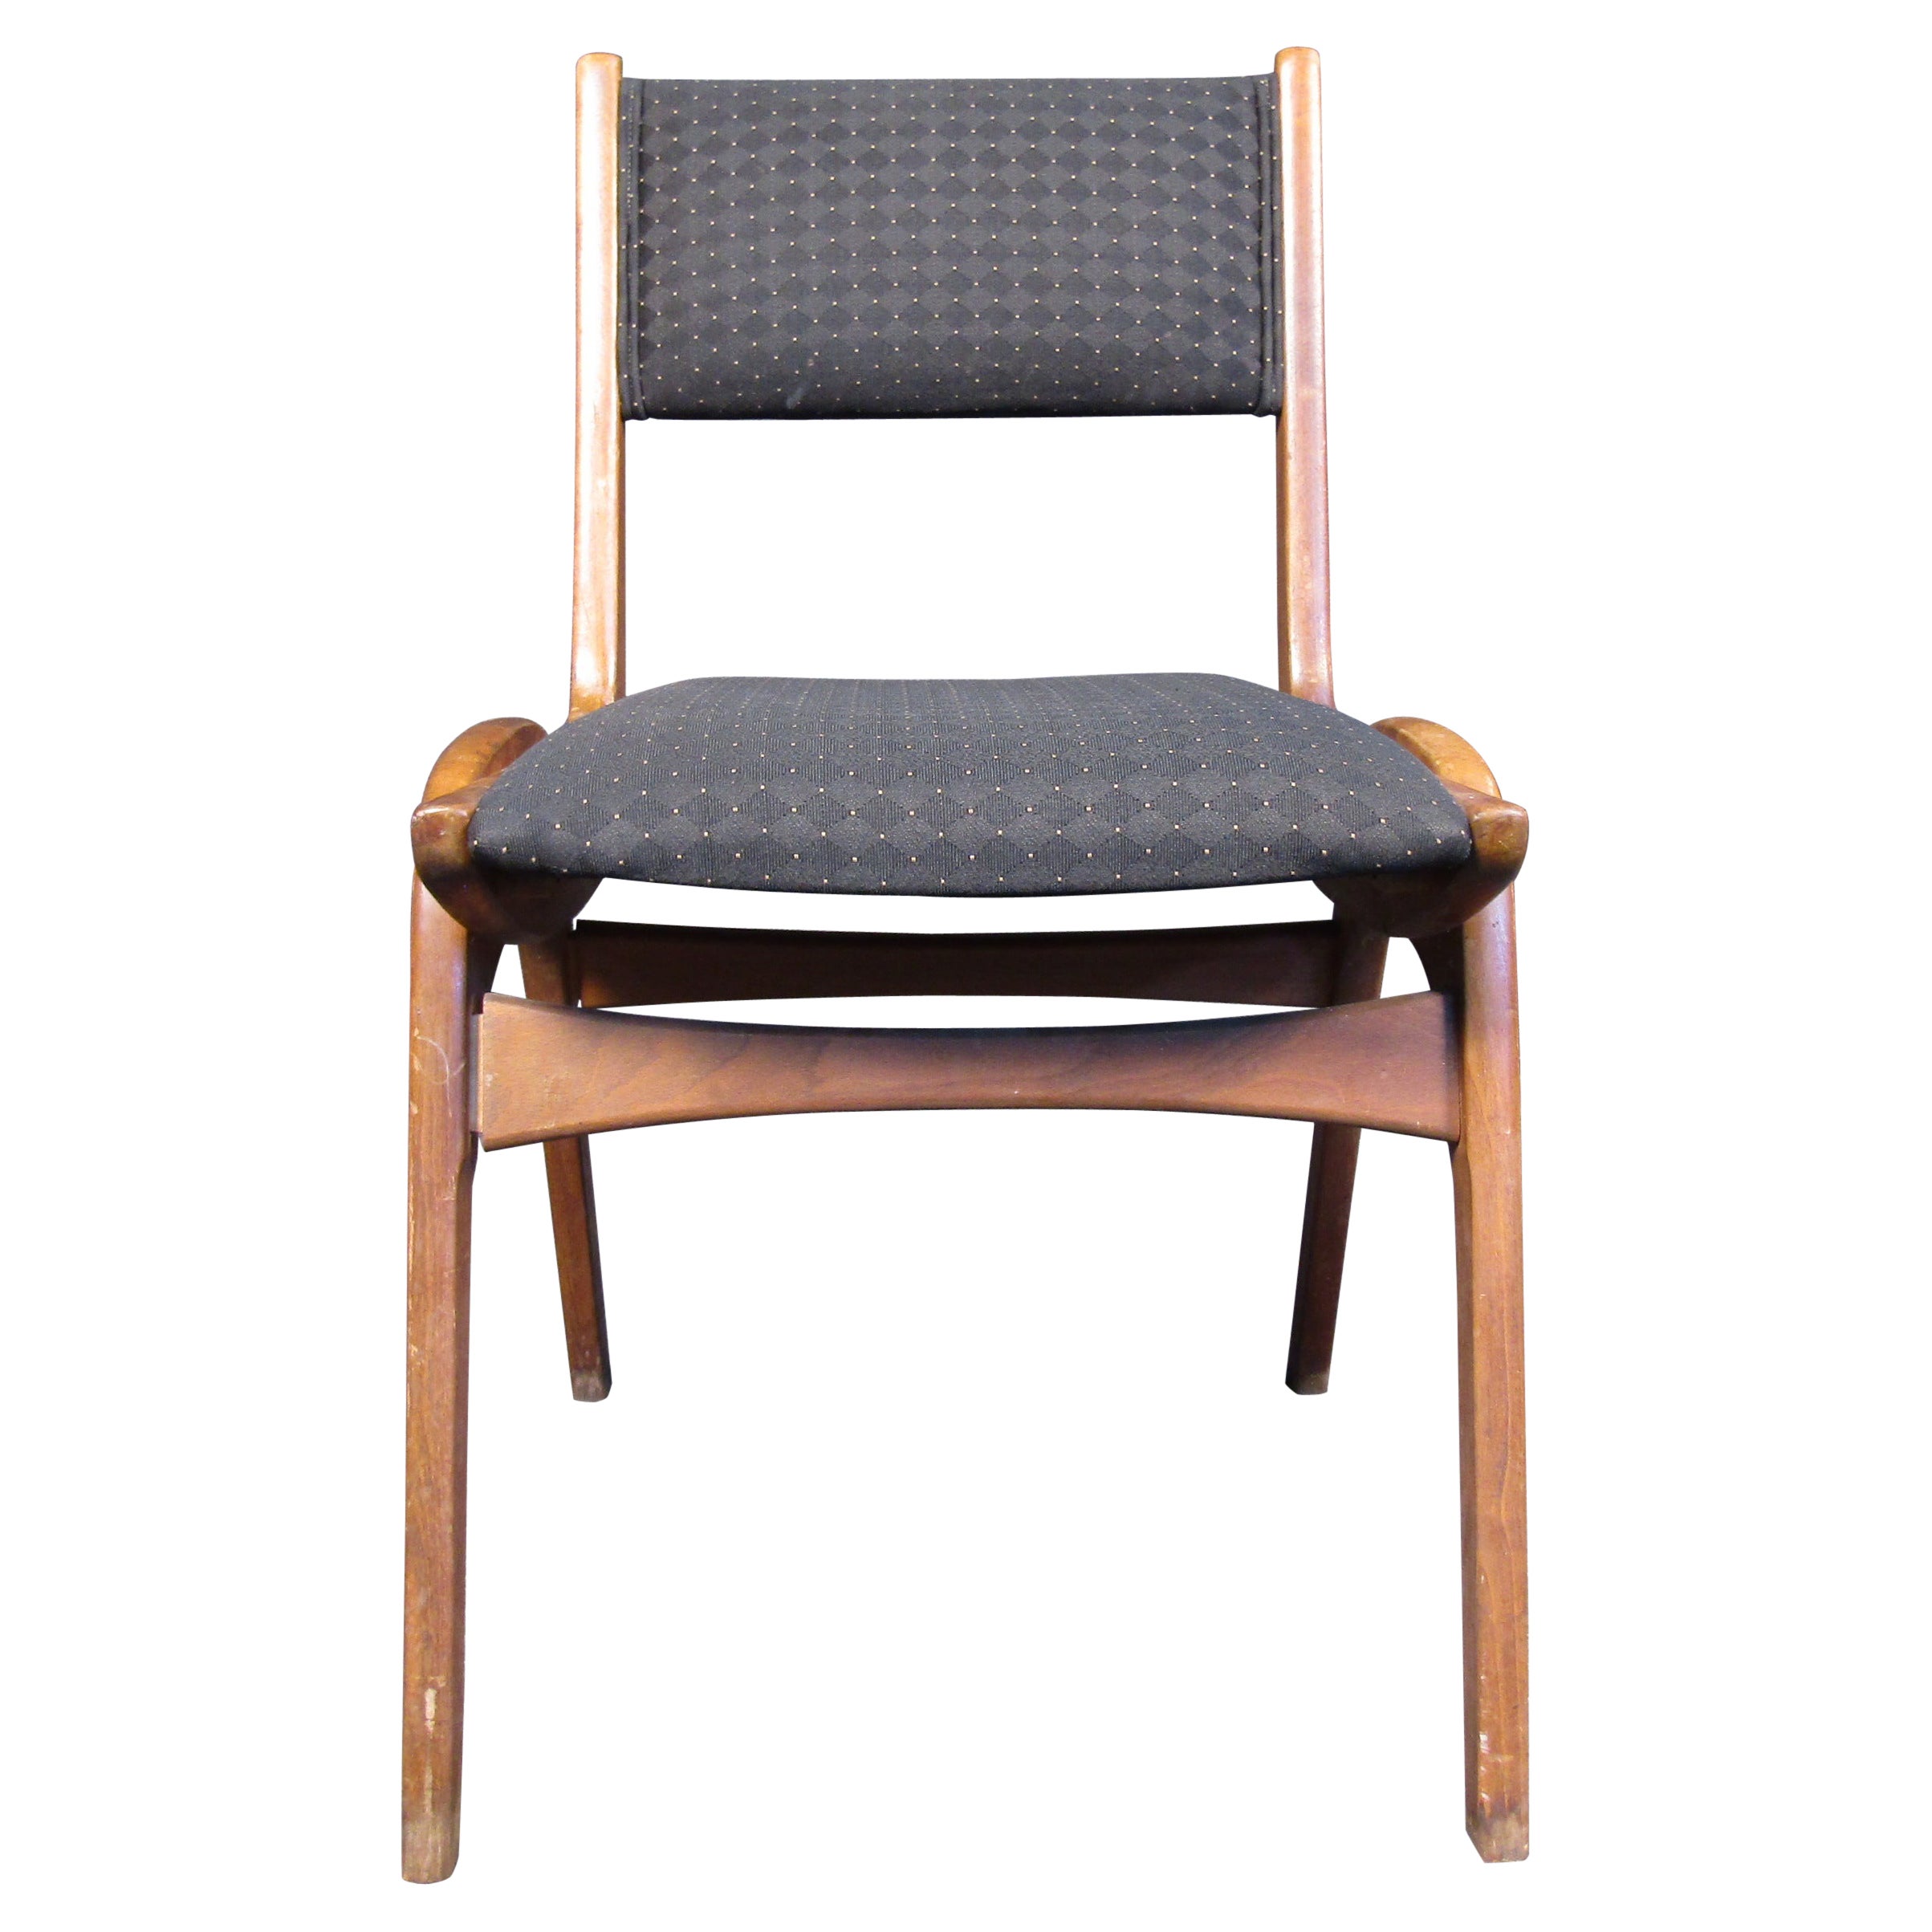 This beautiful Mid-Century Modern lounge chair features walnut hardwood frame and high back upholstered seat. Striking addition to home or office seating area. Please confirm item location (NY or NJ).